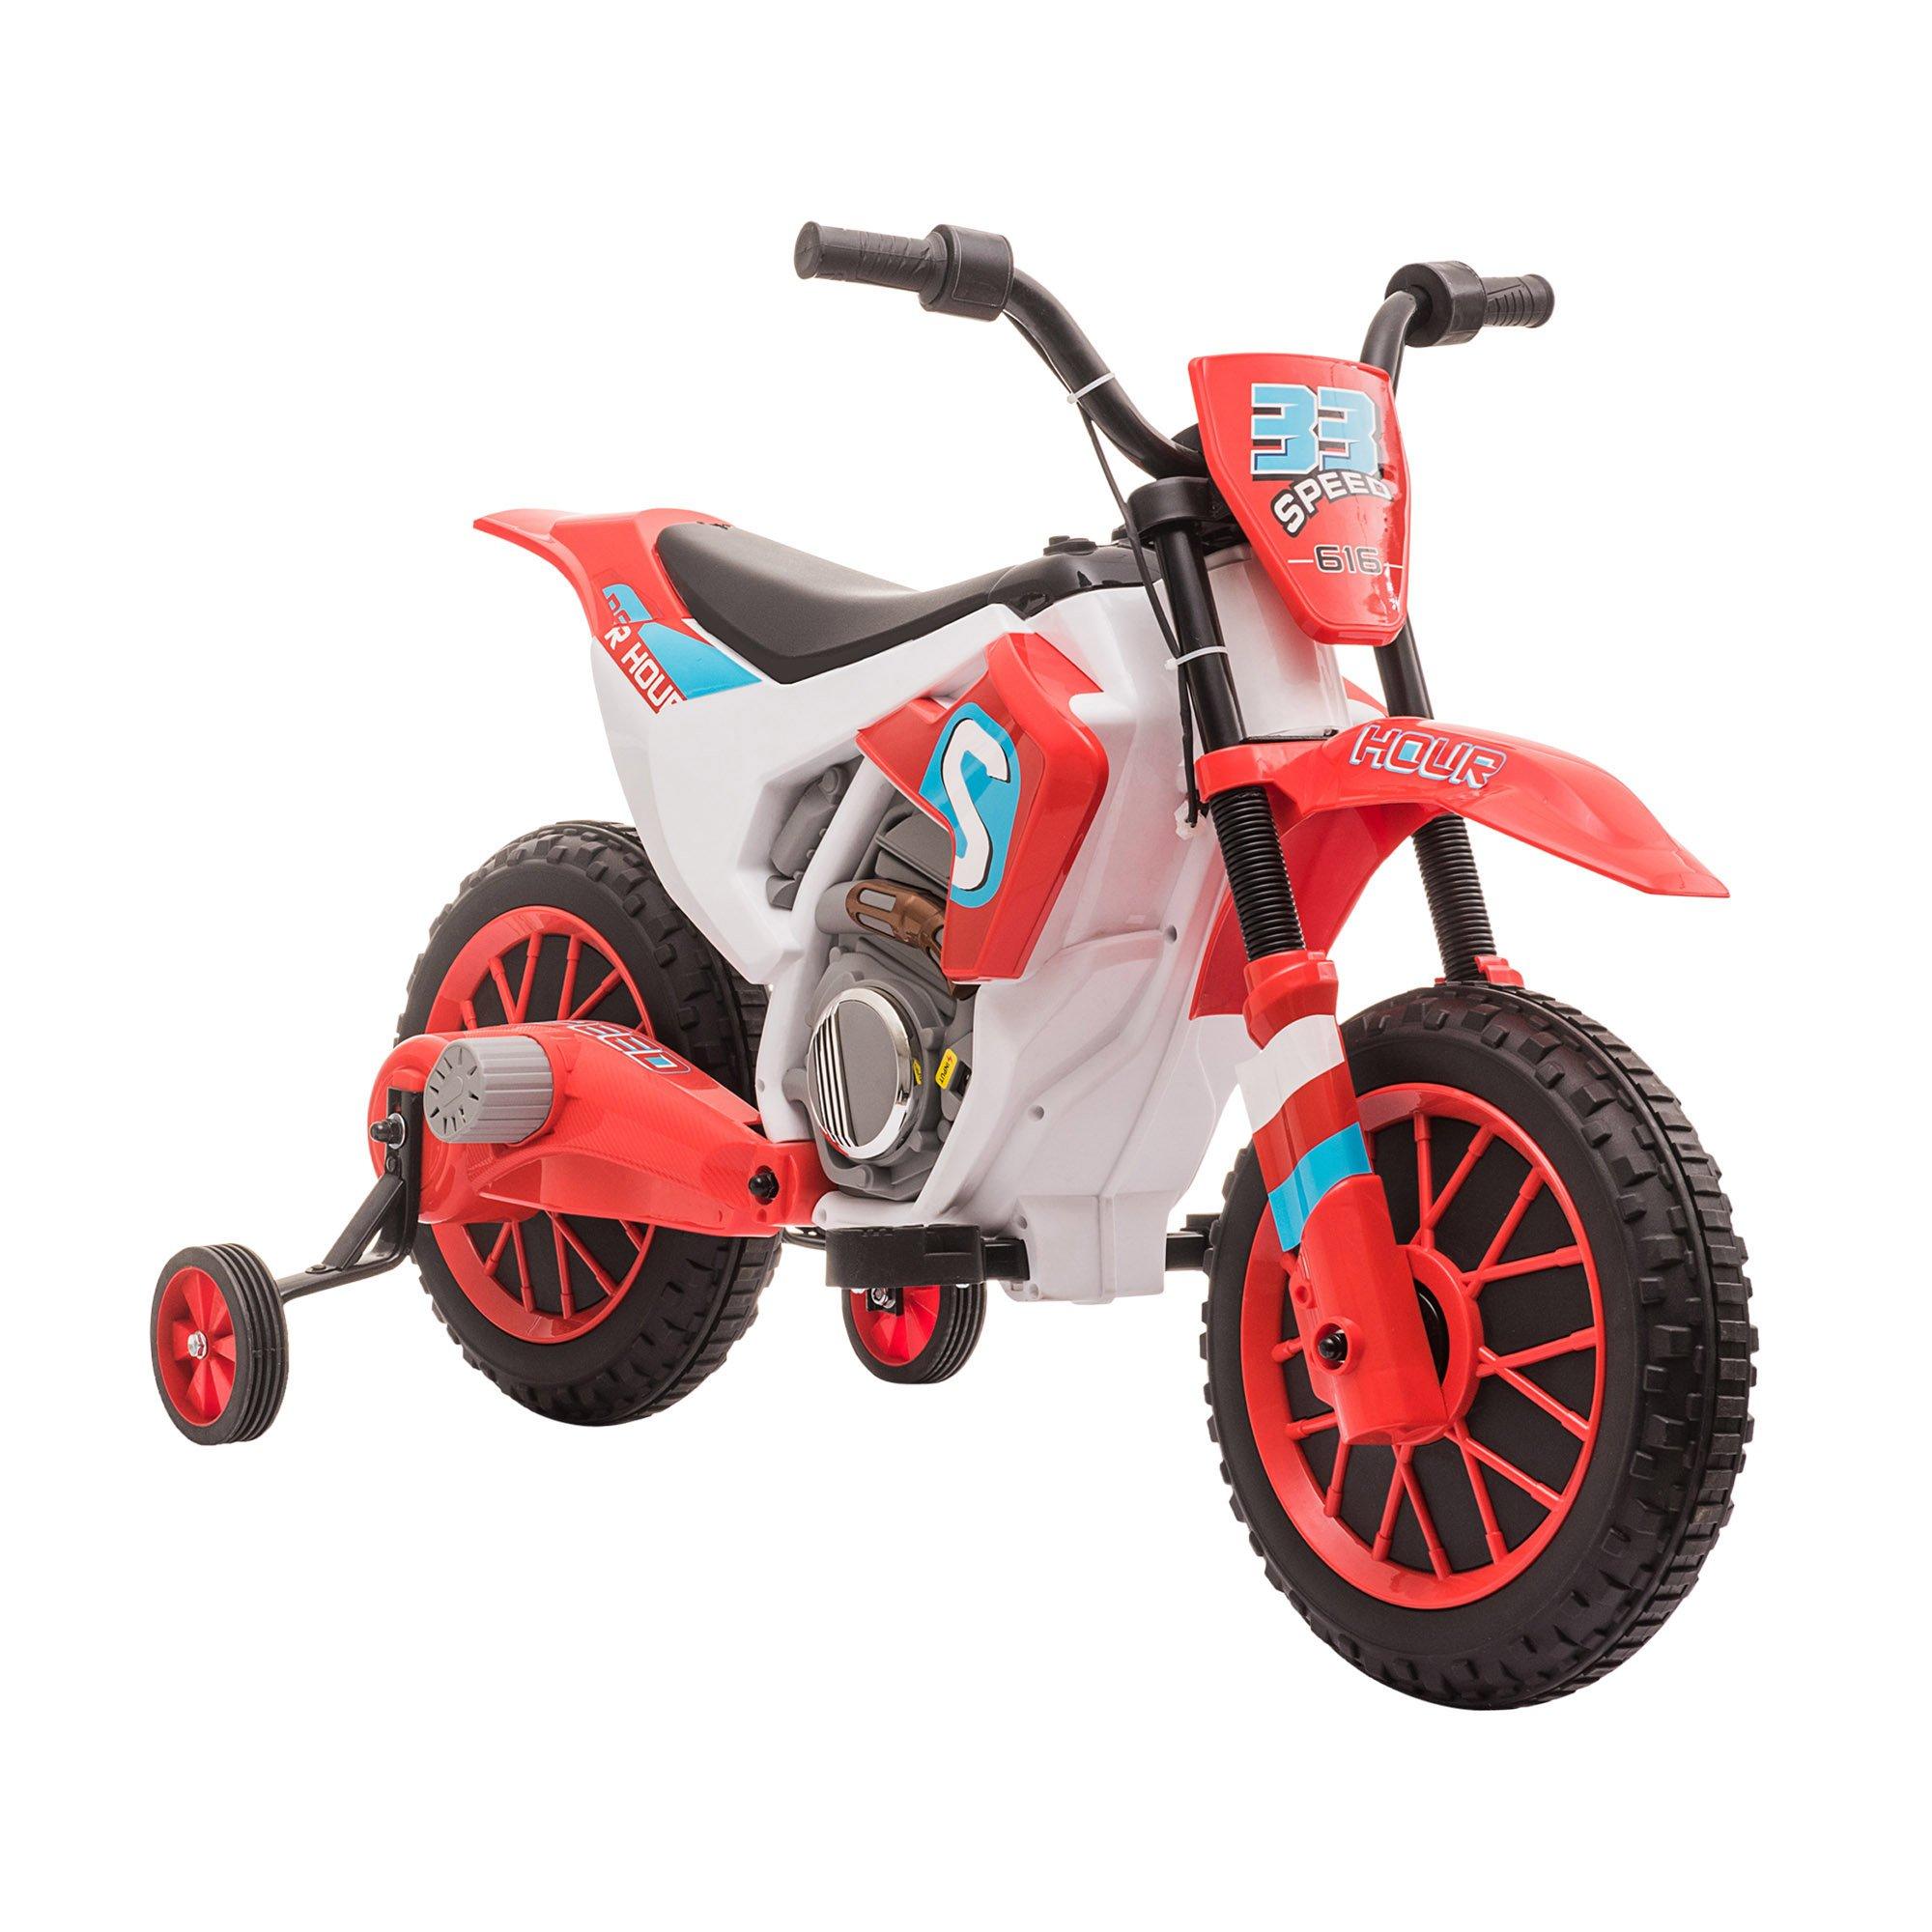 Kids Motorbike Electric Ride-On Toy Training Wheels, for 3-5 Years